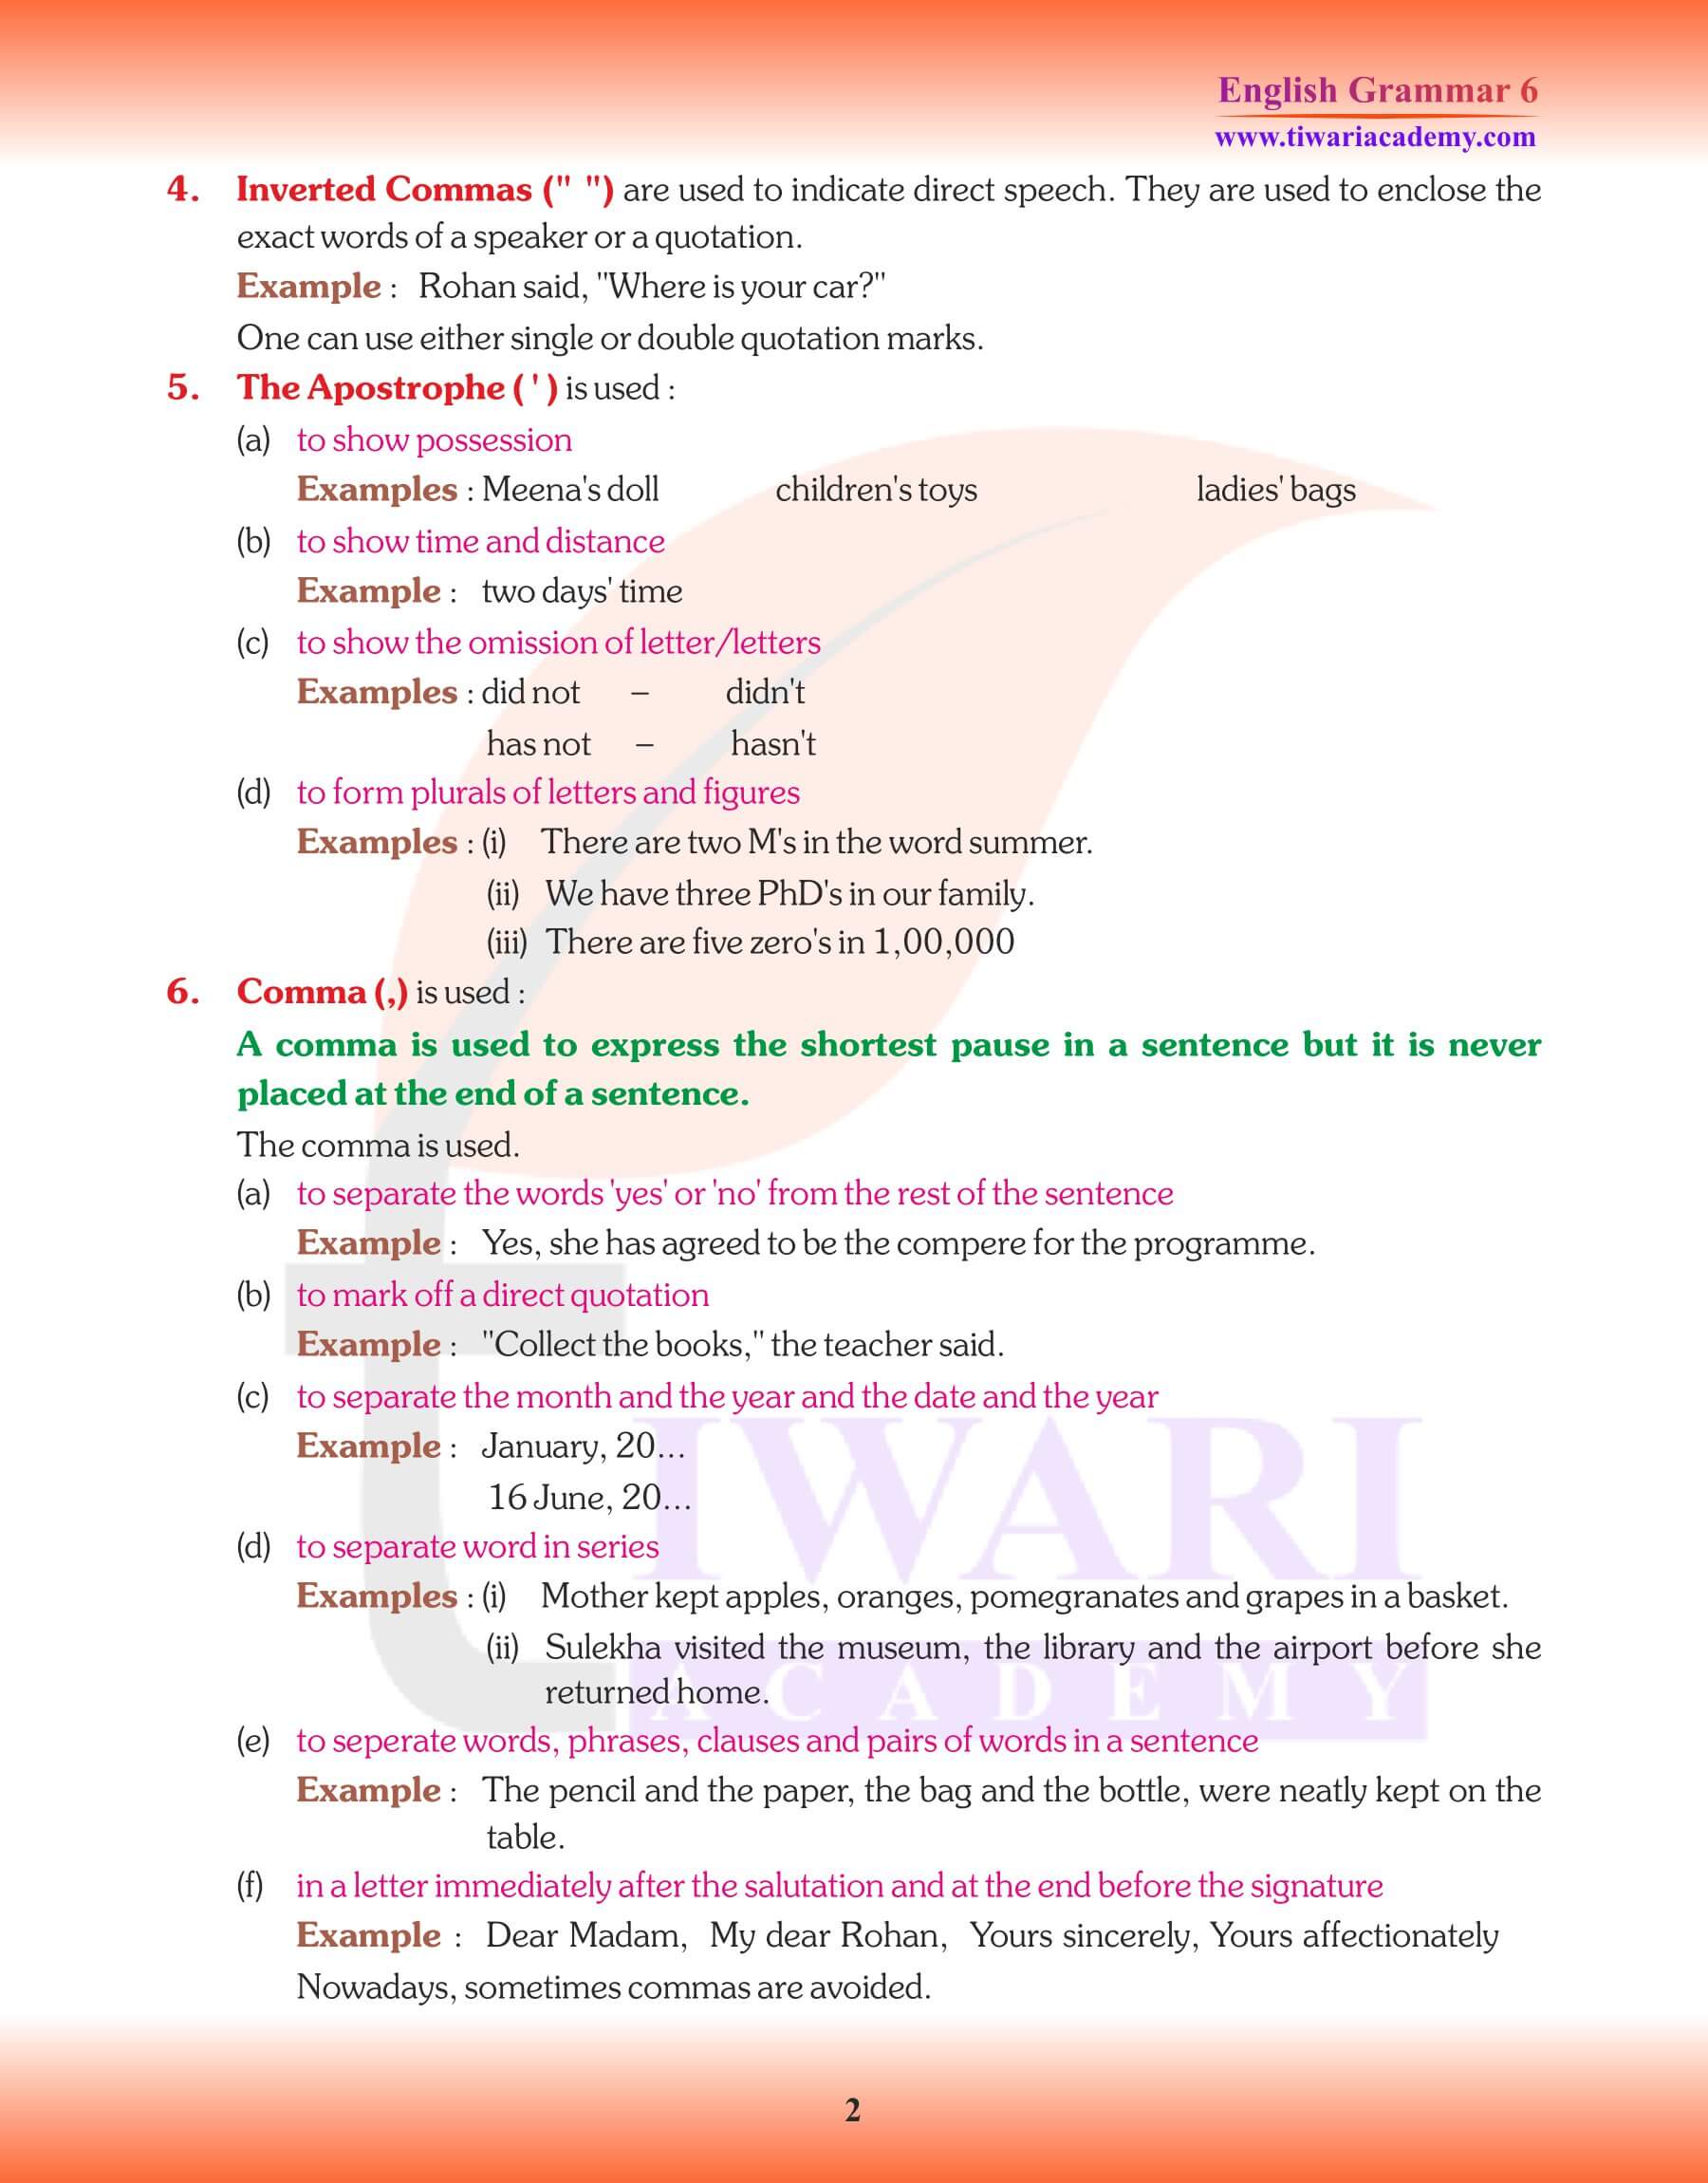 Class 6 English Grammar Punctuation Revision book